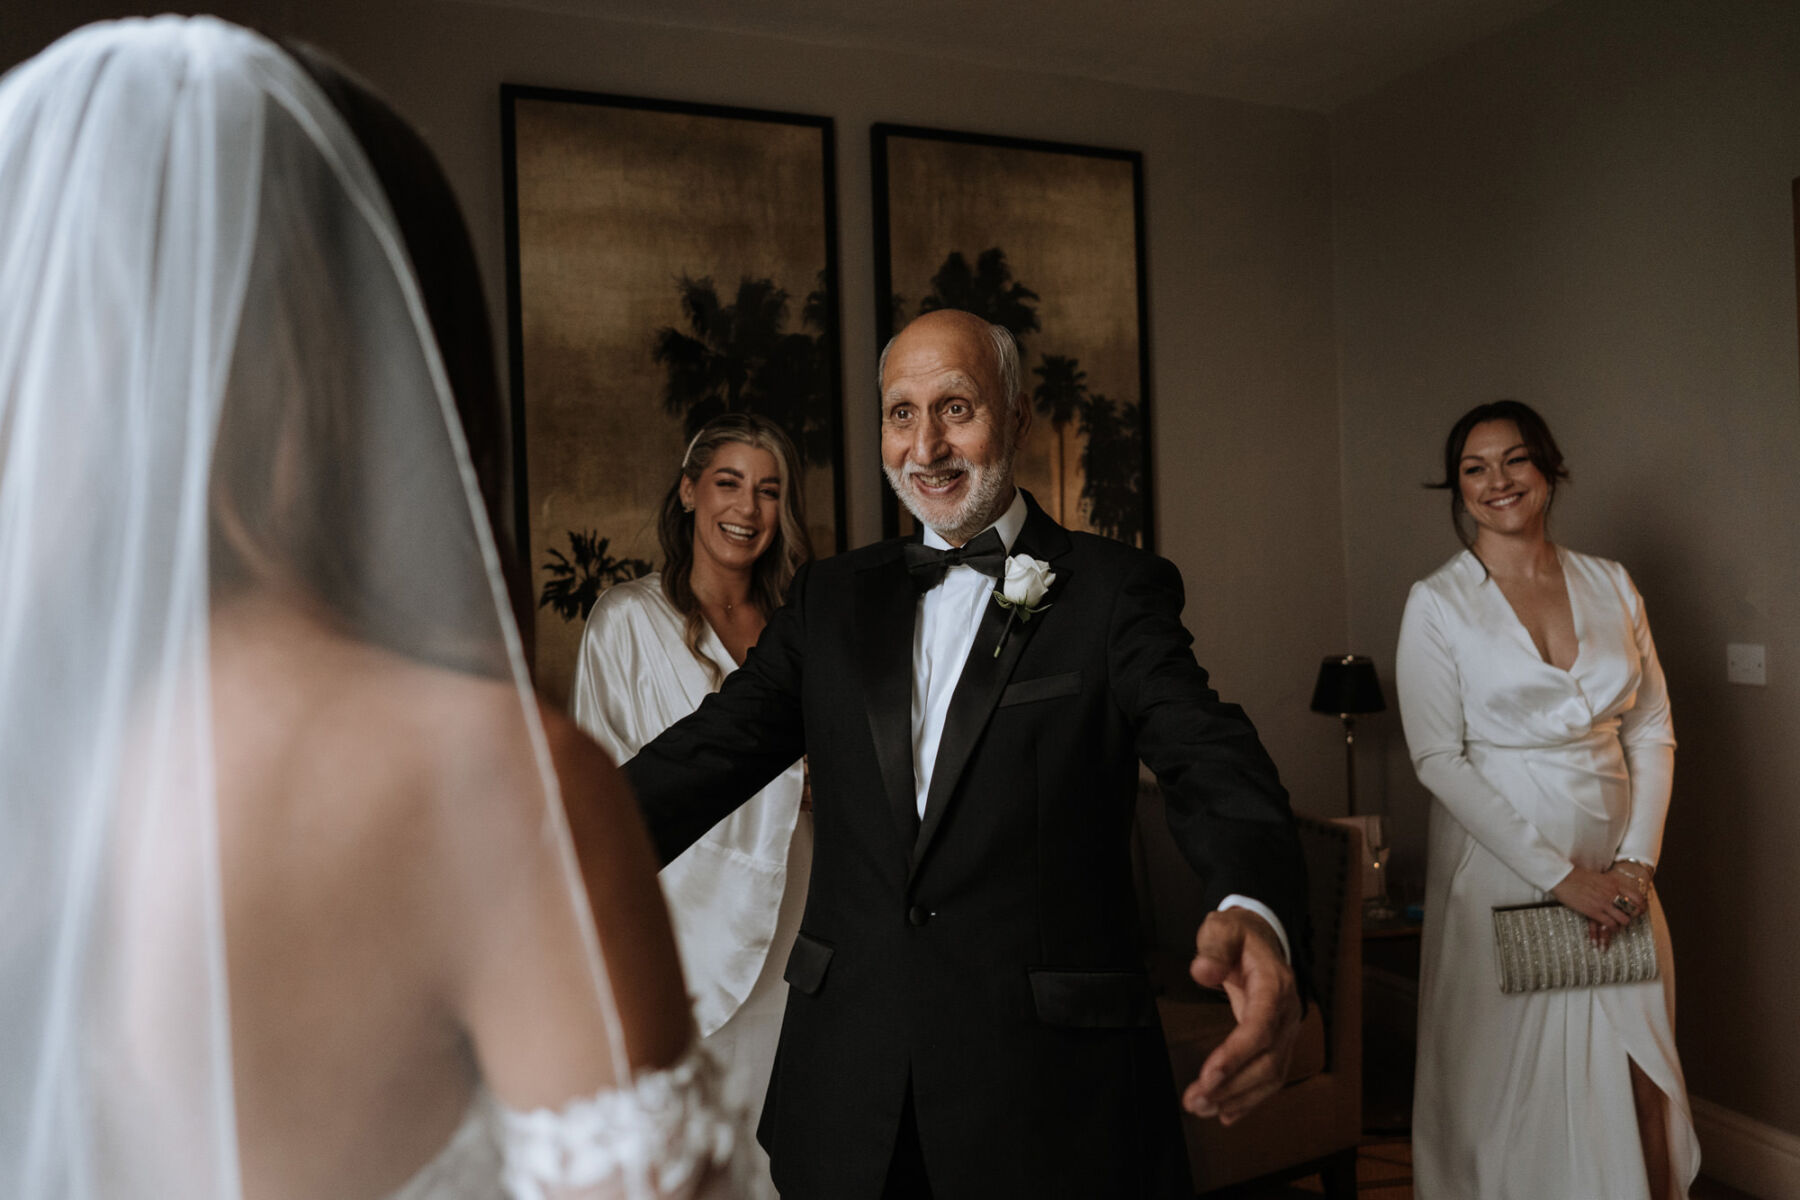 Father of the bride in black tie sees his daughter for for first time in her wedding dress and looks surprised and happy